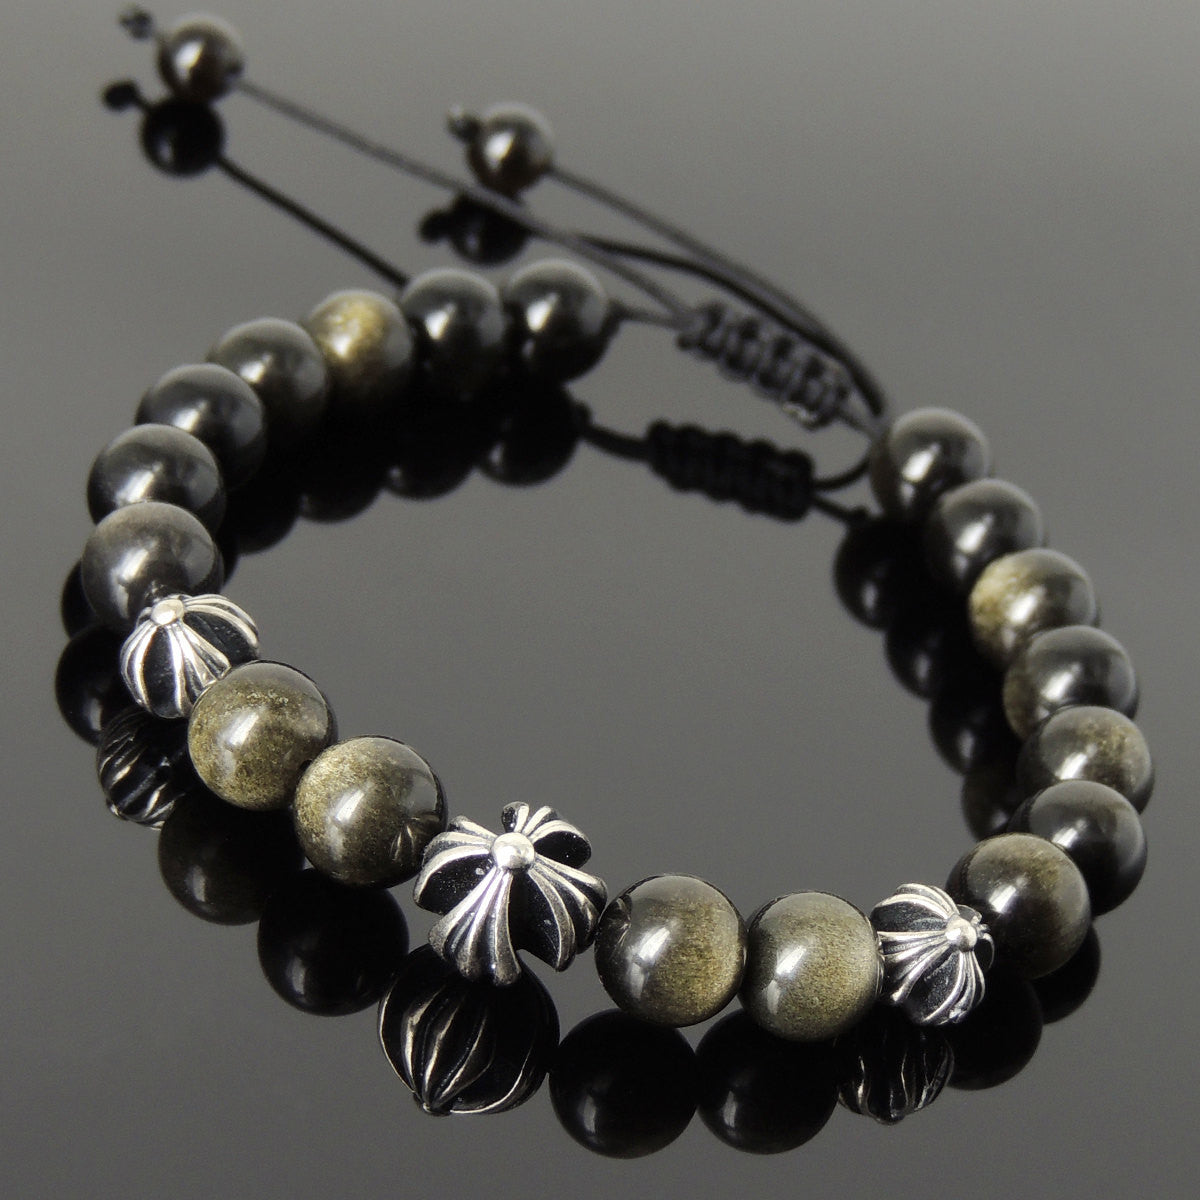 Golden Obsidian Adjustable Braided Gemstone Bracelet with S925 Sterling Silver Holy Trinity Cross Beads - Handmade by Gem & Silver BR845